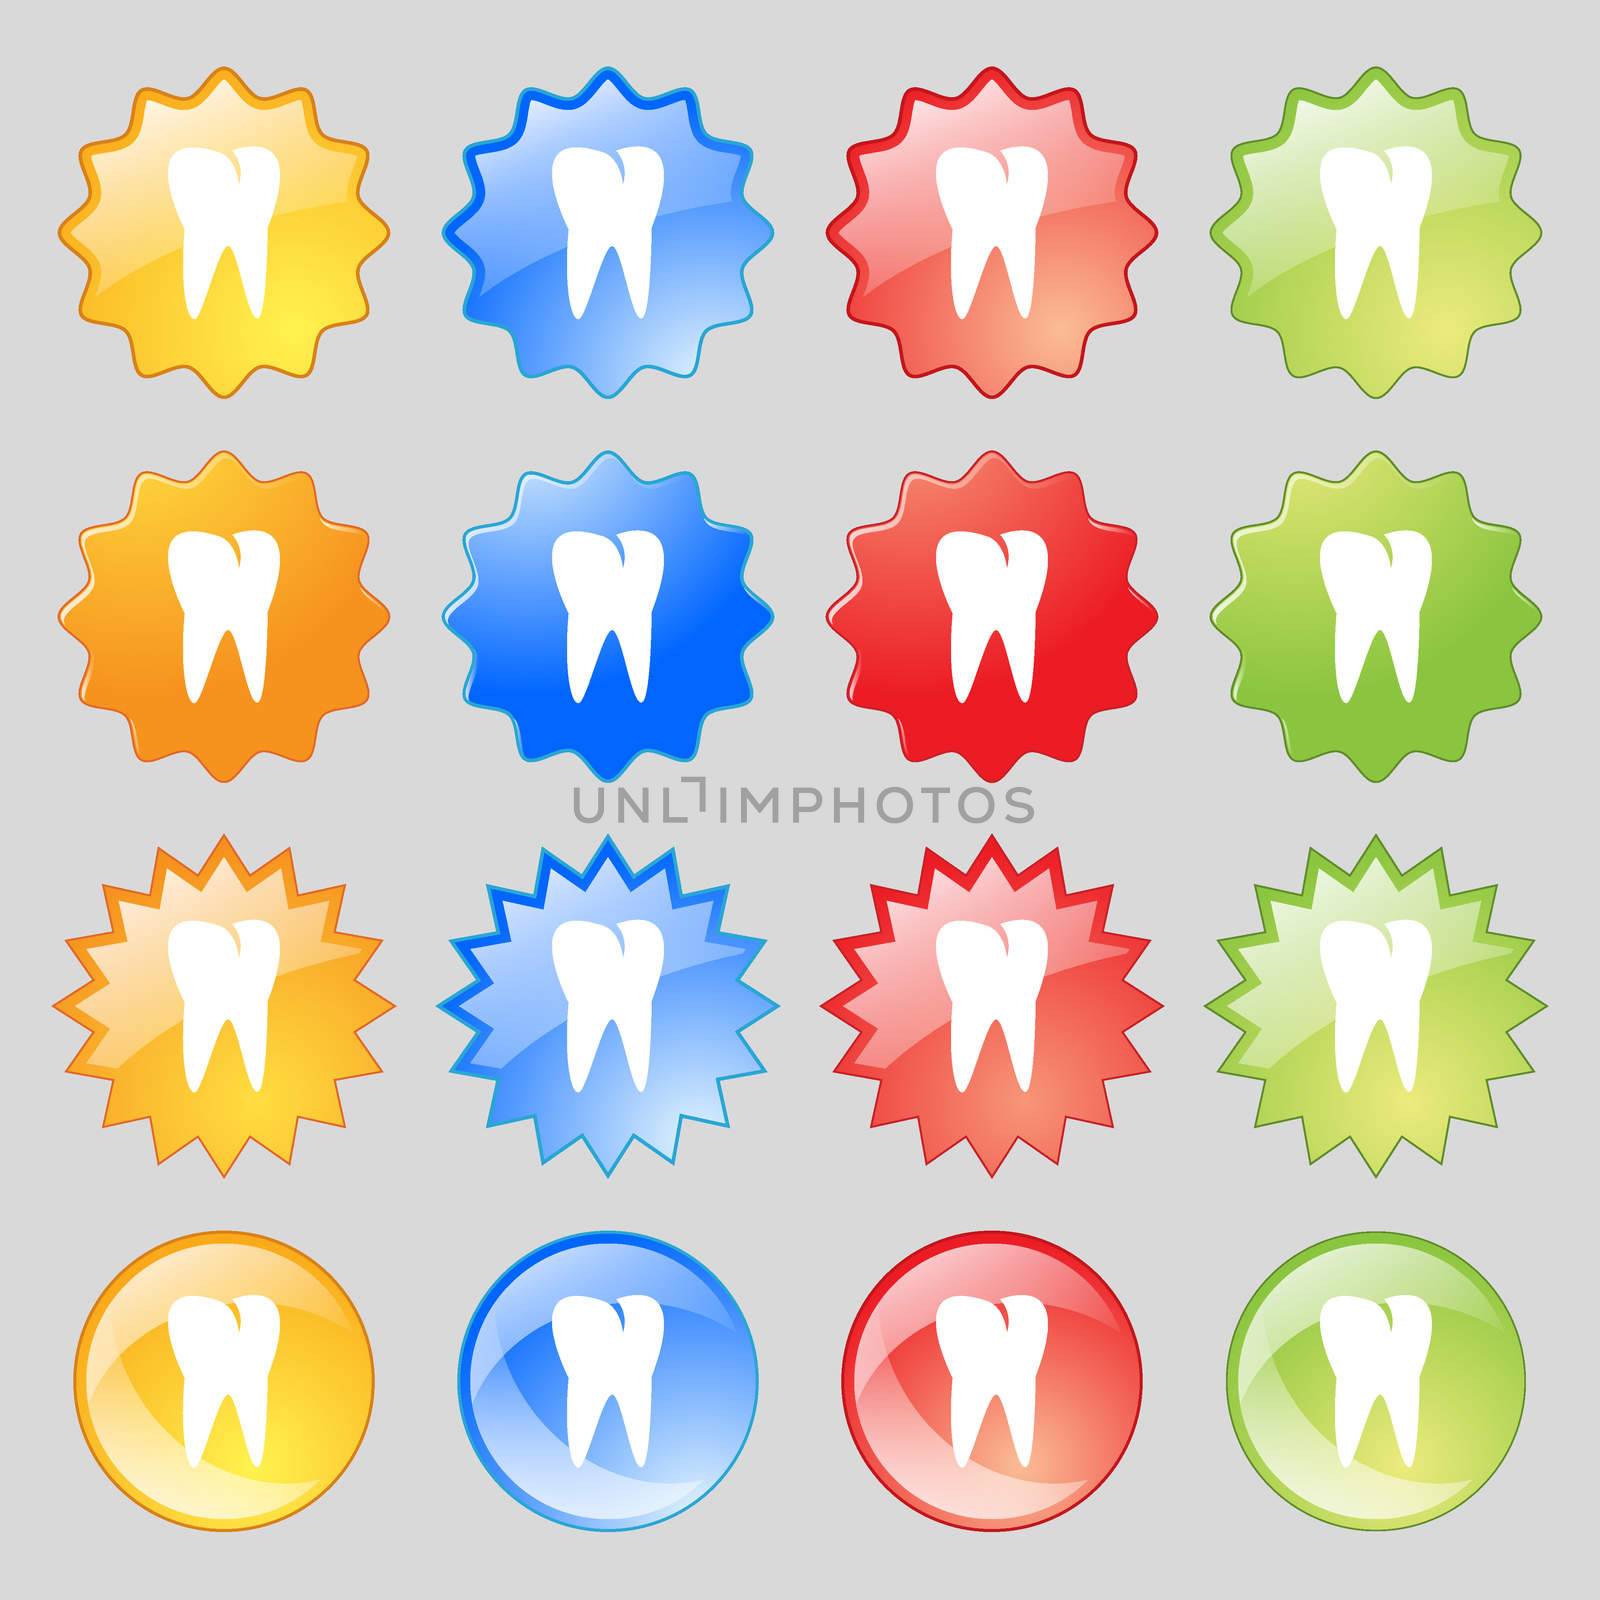 tooth icon. Big set of 16 colorful modern buttons for your design. illustration